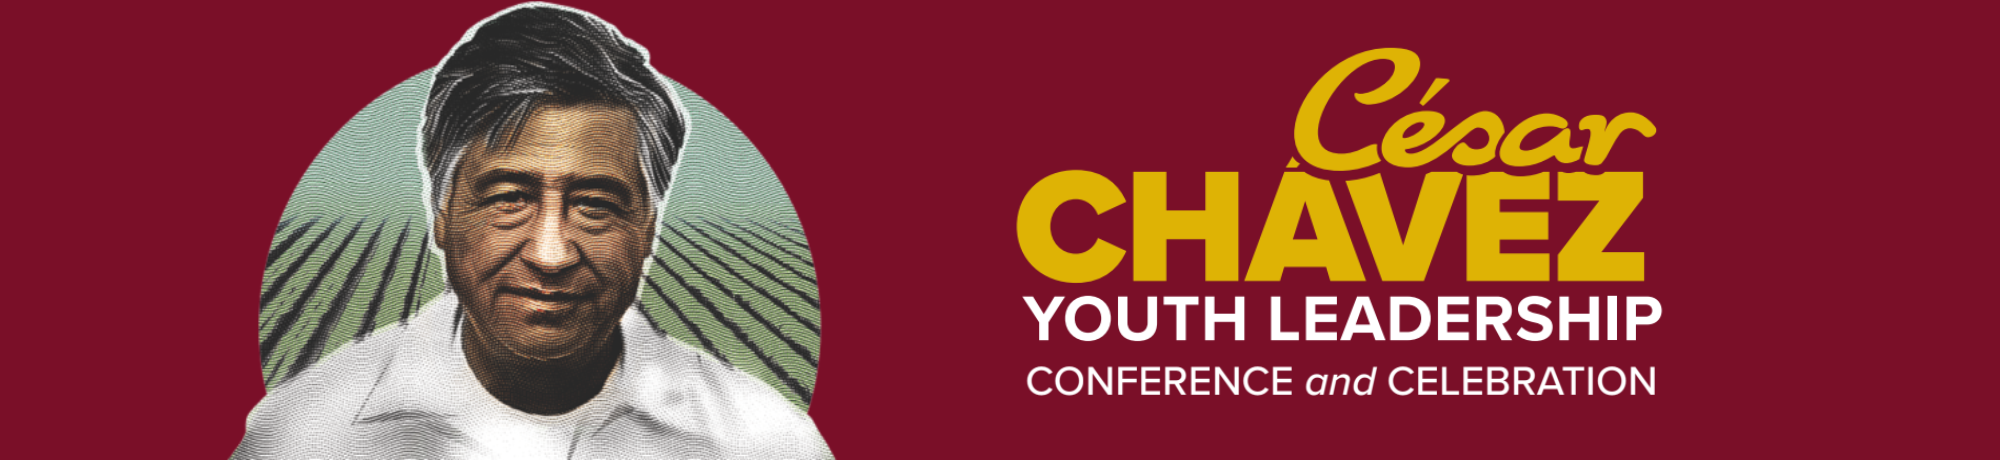 César Chavez Youth Leadership Conference and Celebration